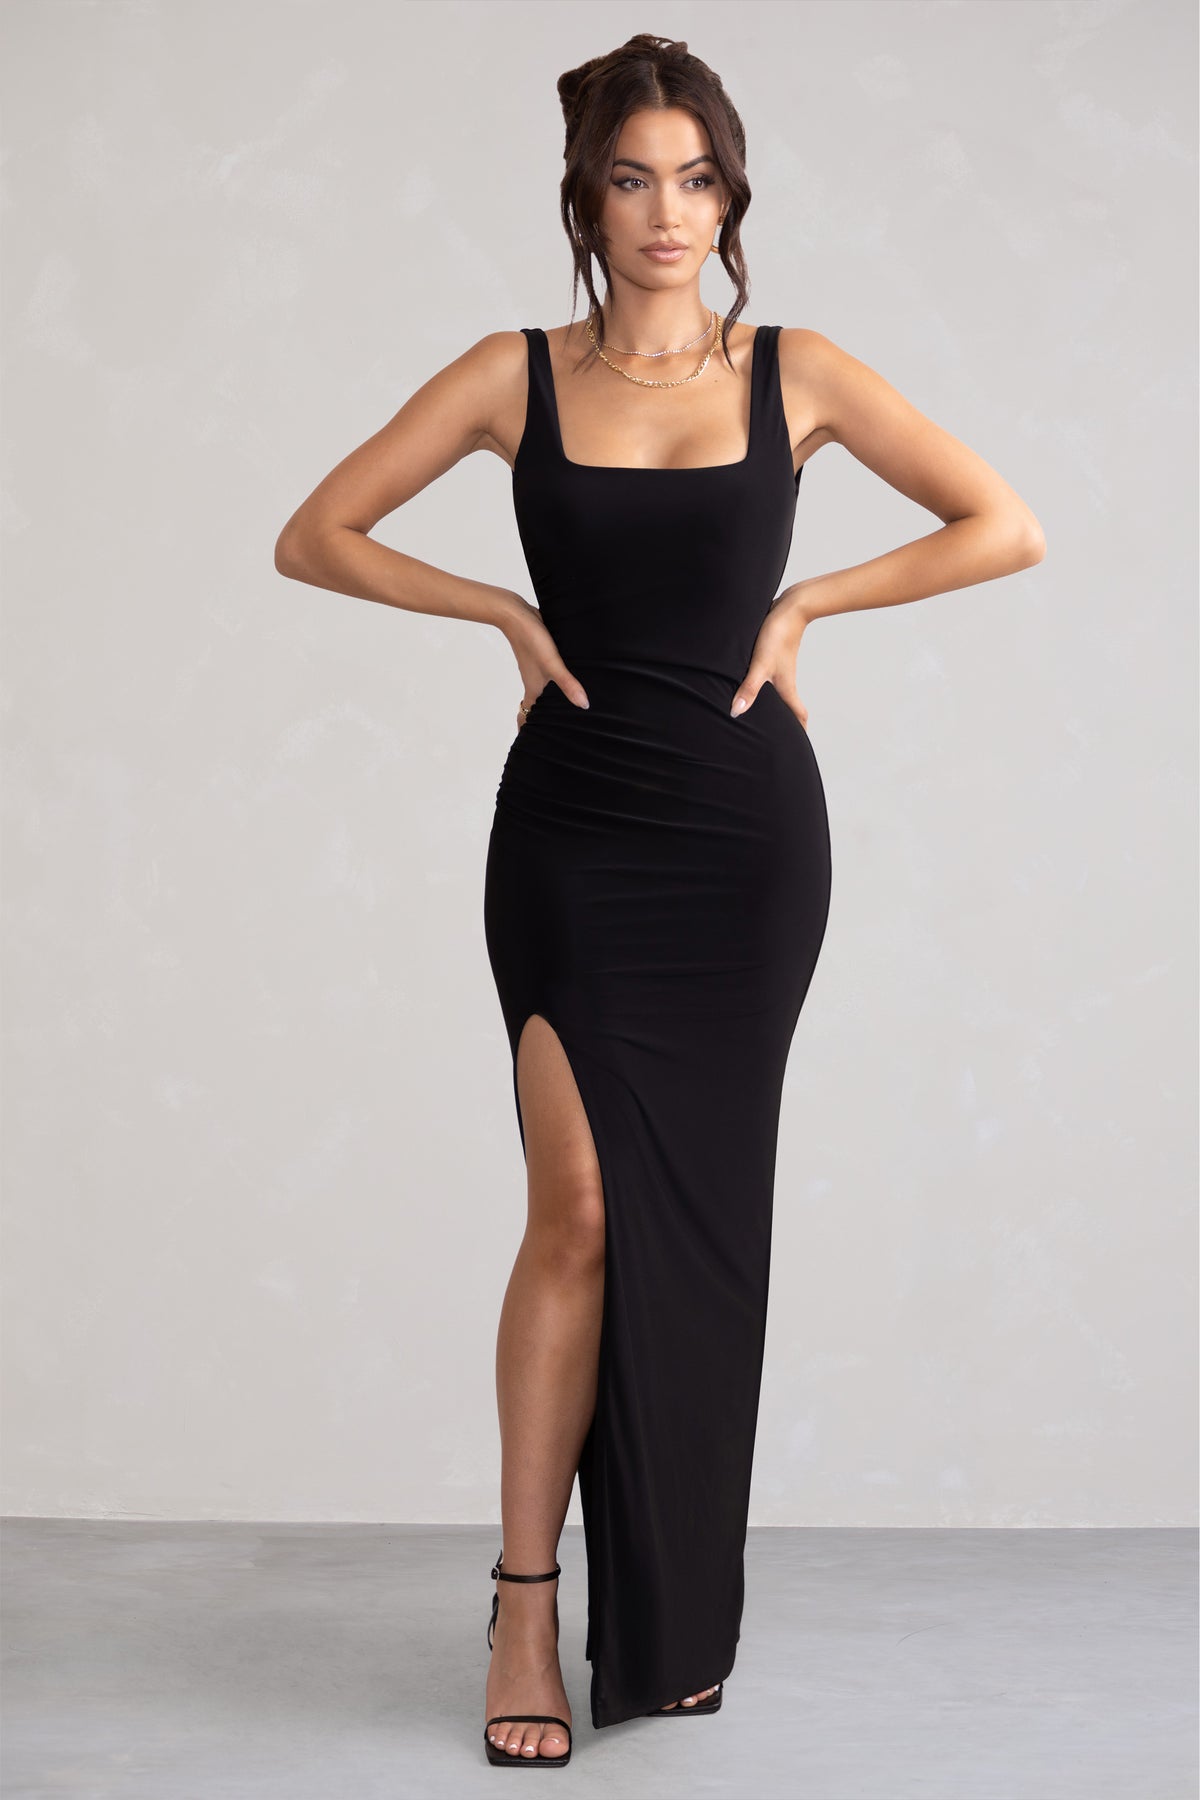 Kate Black Square Neck Maxi Dress with Plunge Back and Side Thigh Sp ...